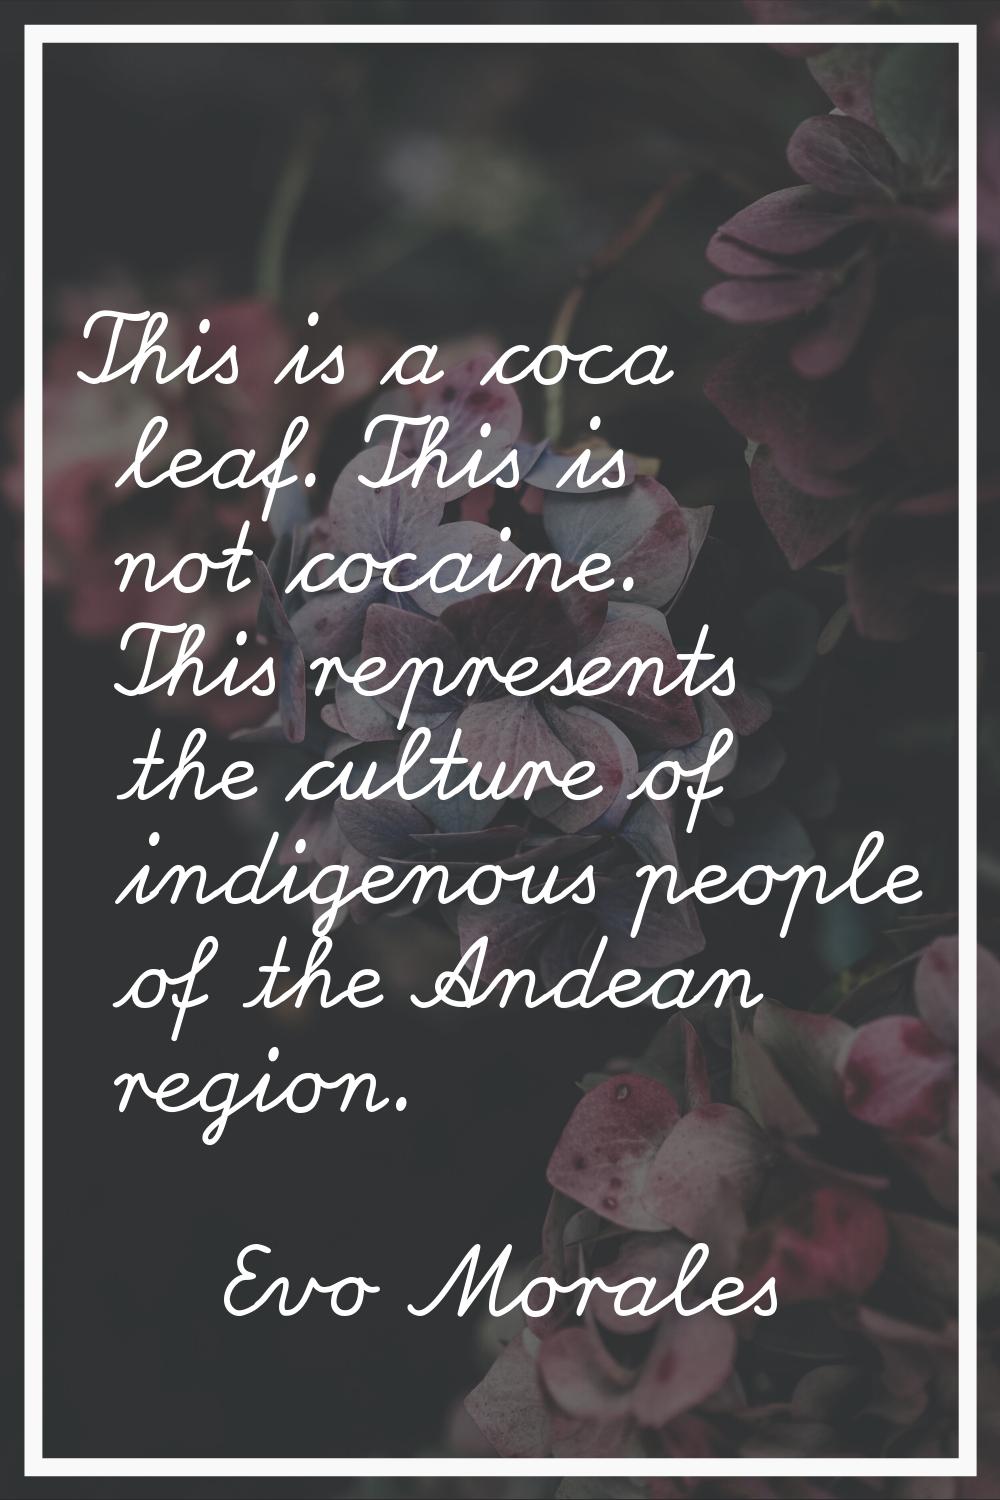 This is a coca leaf. This is not cocaine. This represents the culture of indigenous people of the A